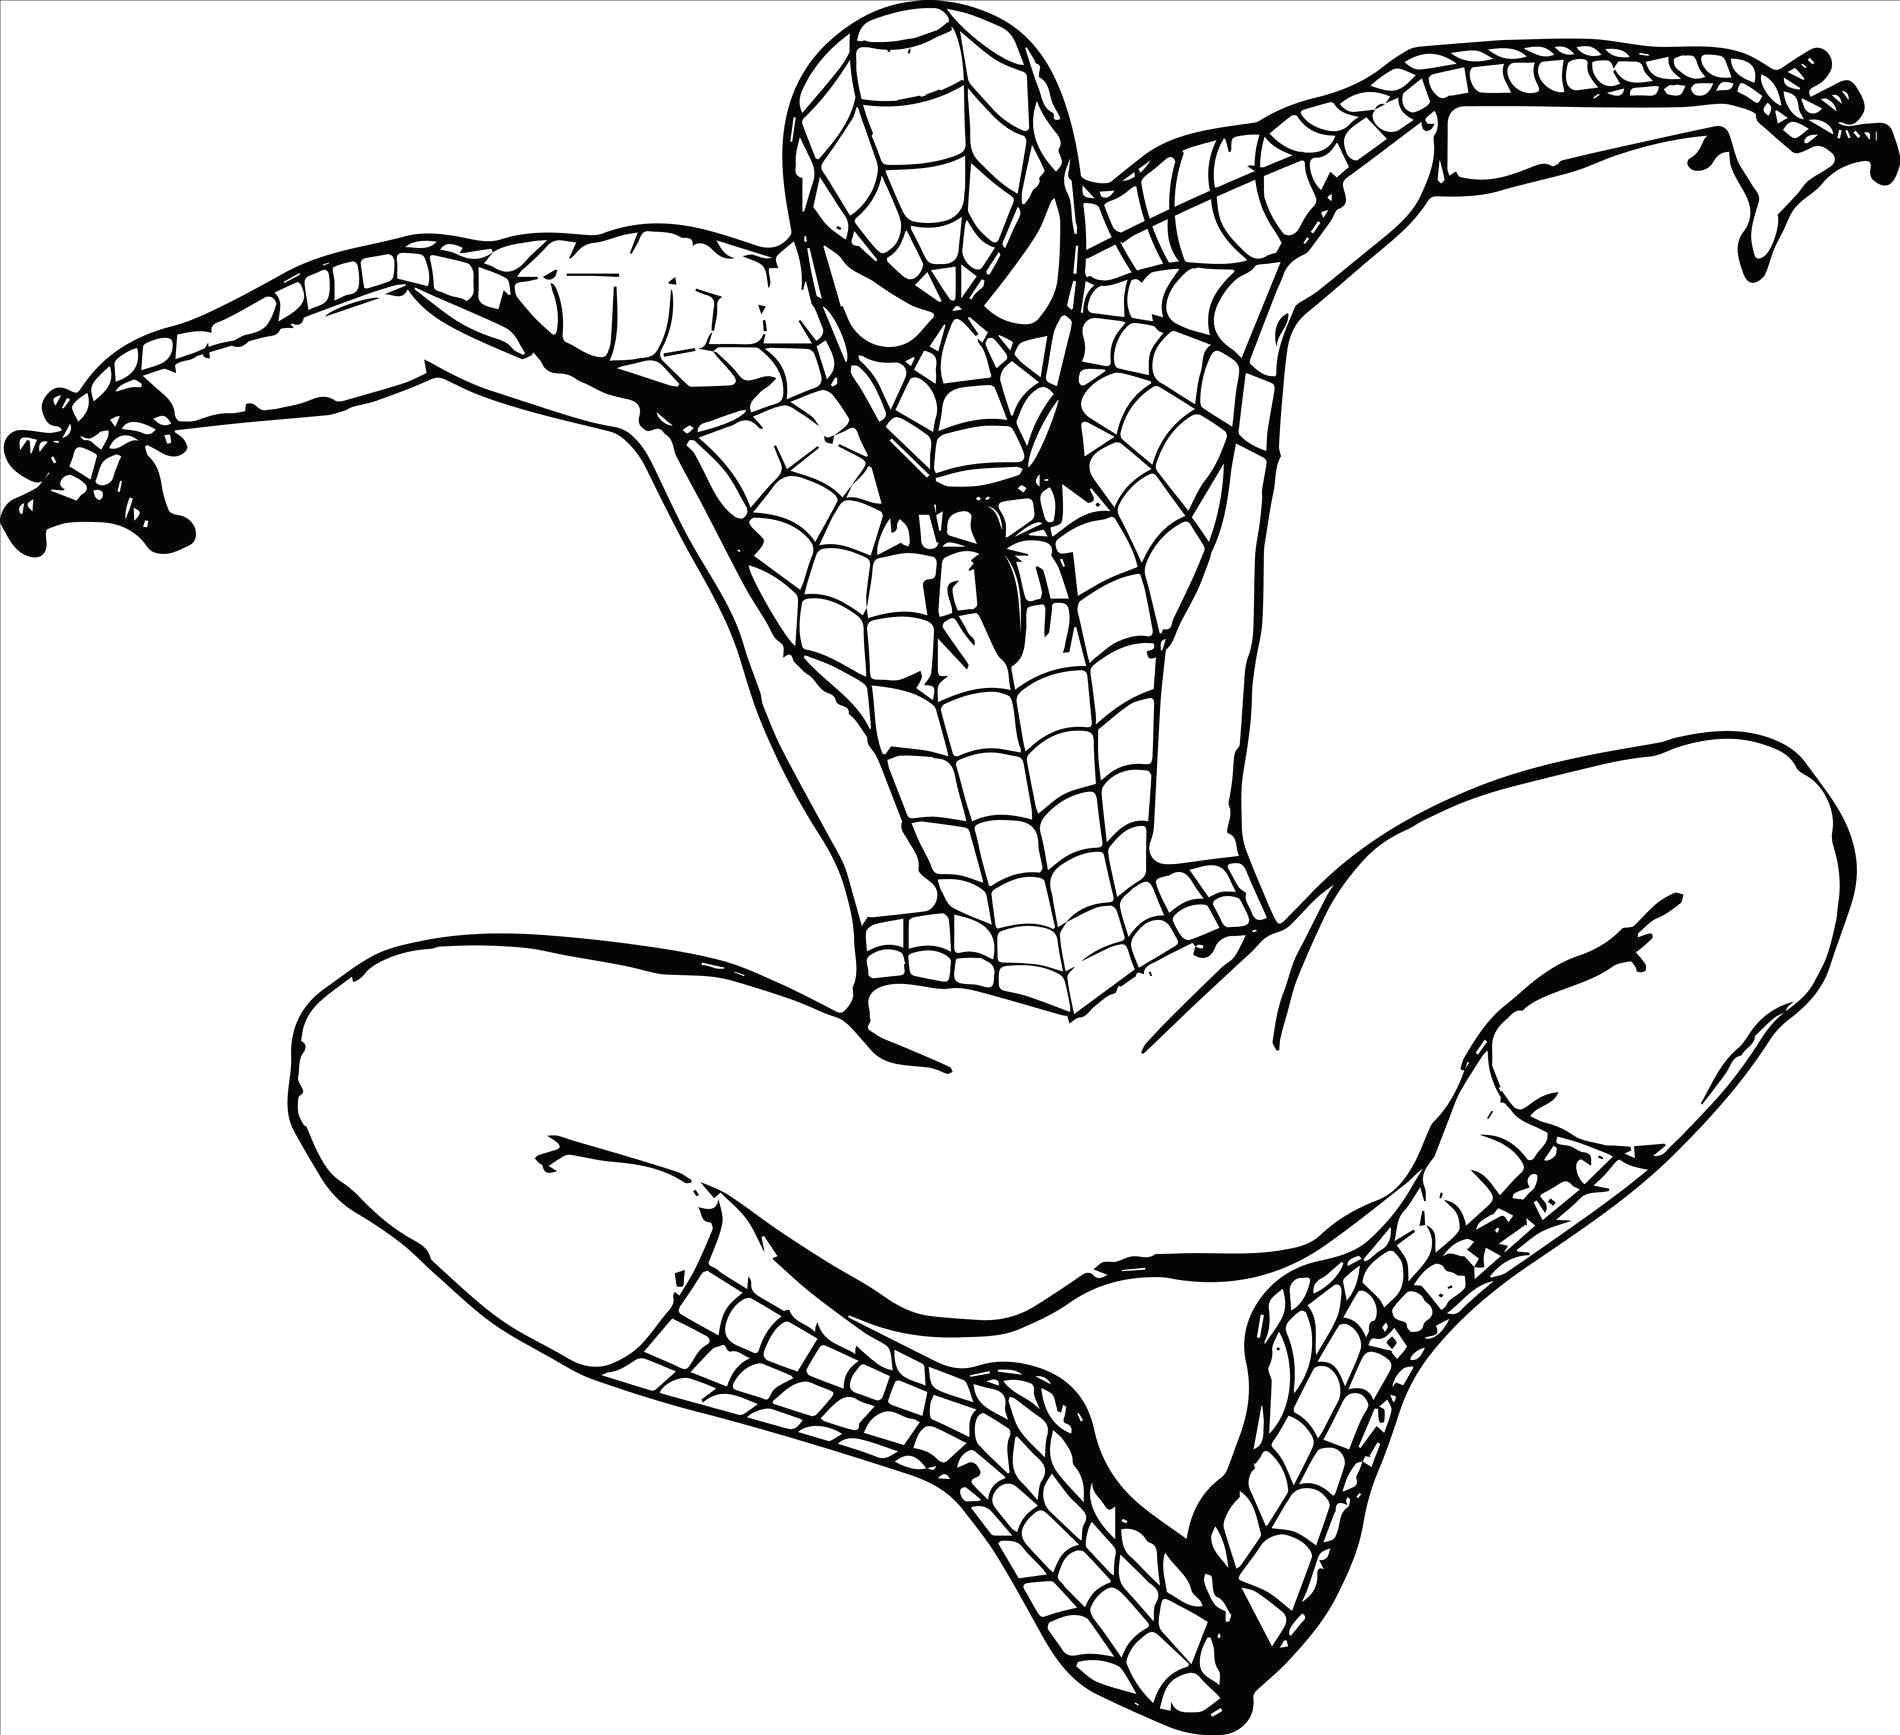 Easy Drawings Human Superheroes Easy to Draw Spiderman Coloring Pages Luxury 0 0d